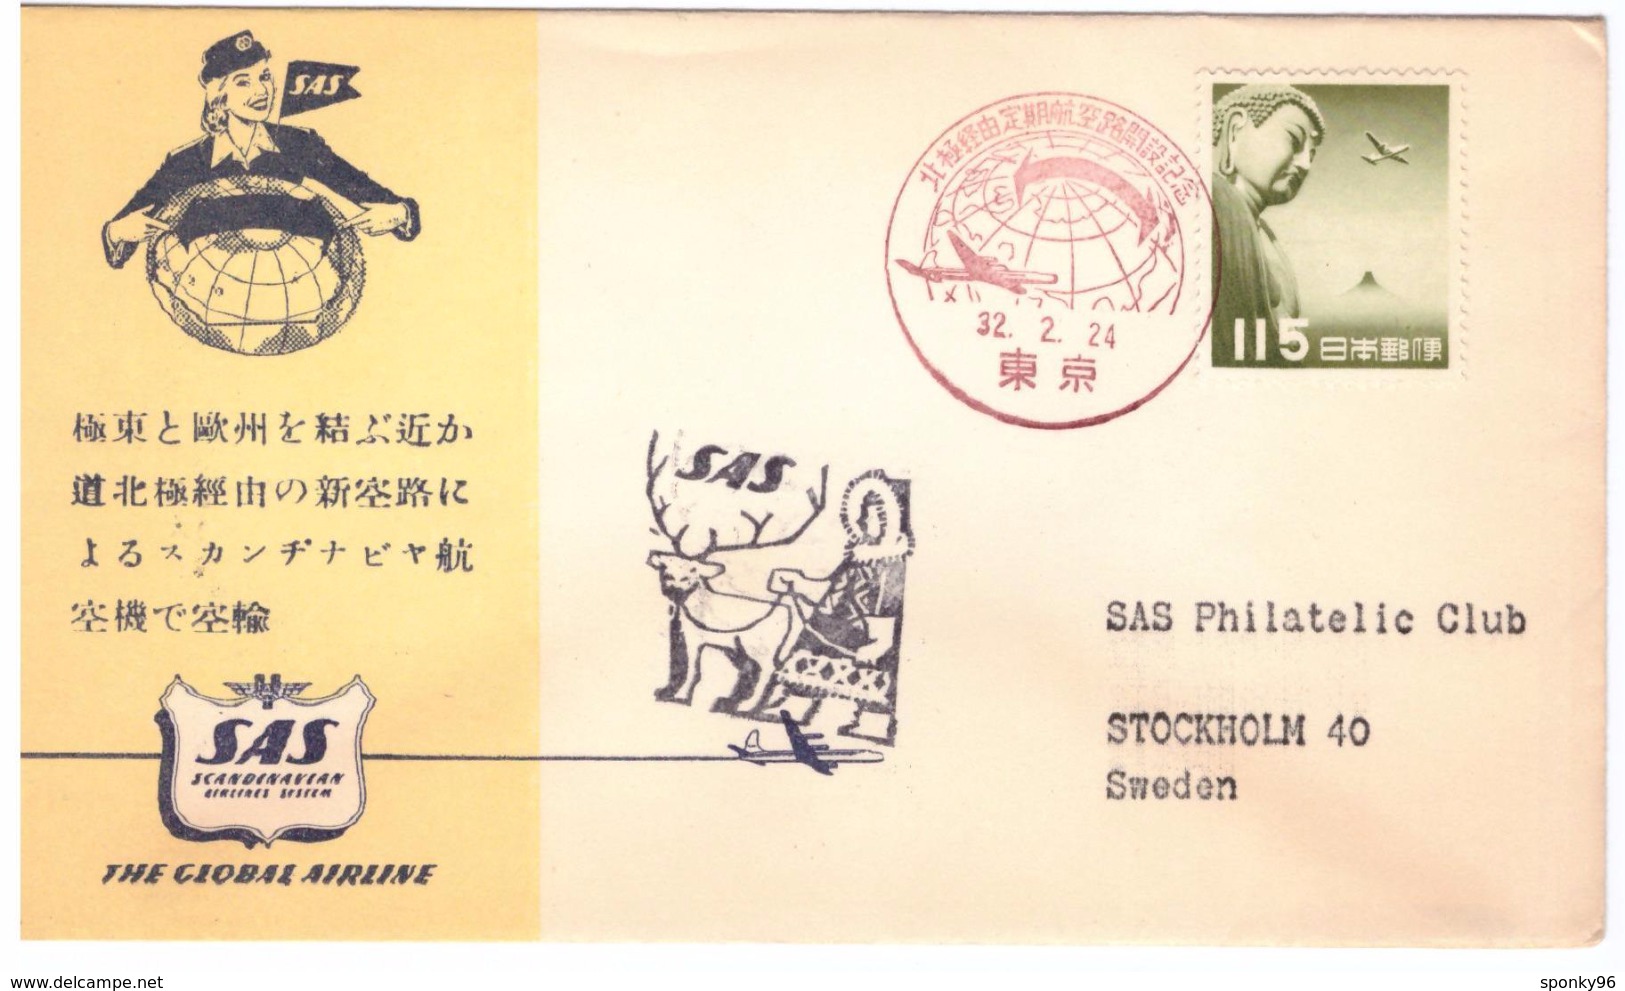 STORIA POSTALE - GIAPPONE - JAPAN - ANNO 1957 - TOKIO - FILATELISTIKLUBB - FLOWN OVER THE PEOPLE- STOCHOLM - SWEDEN - - Covers & Documents